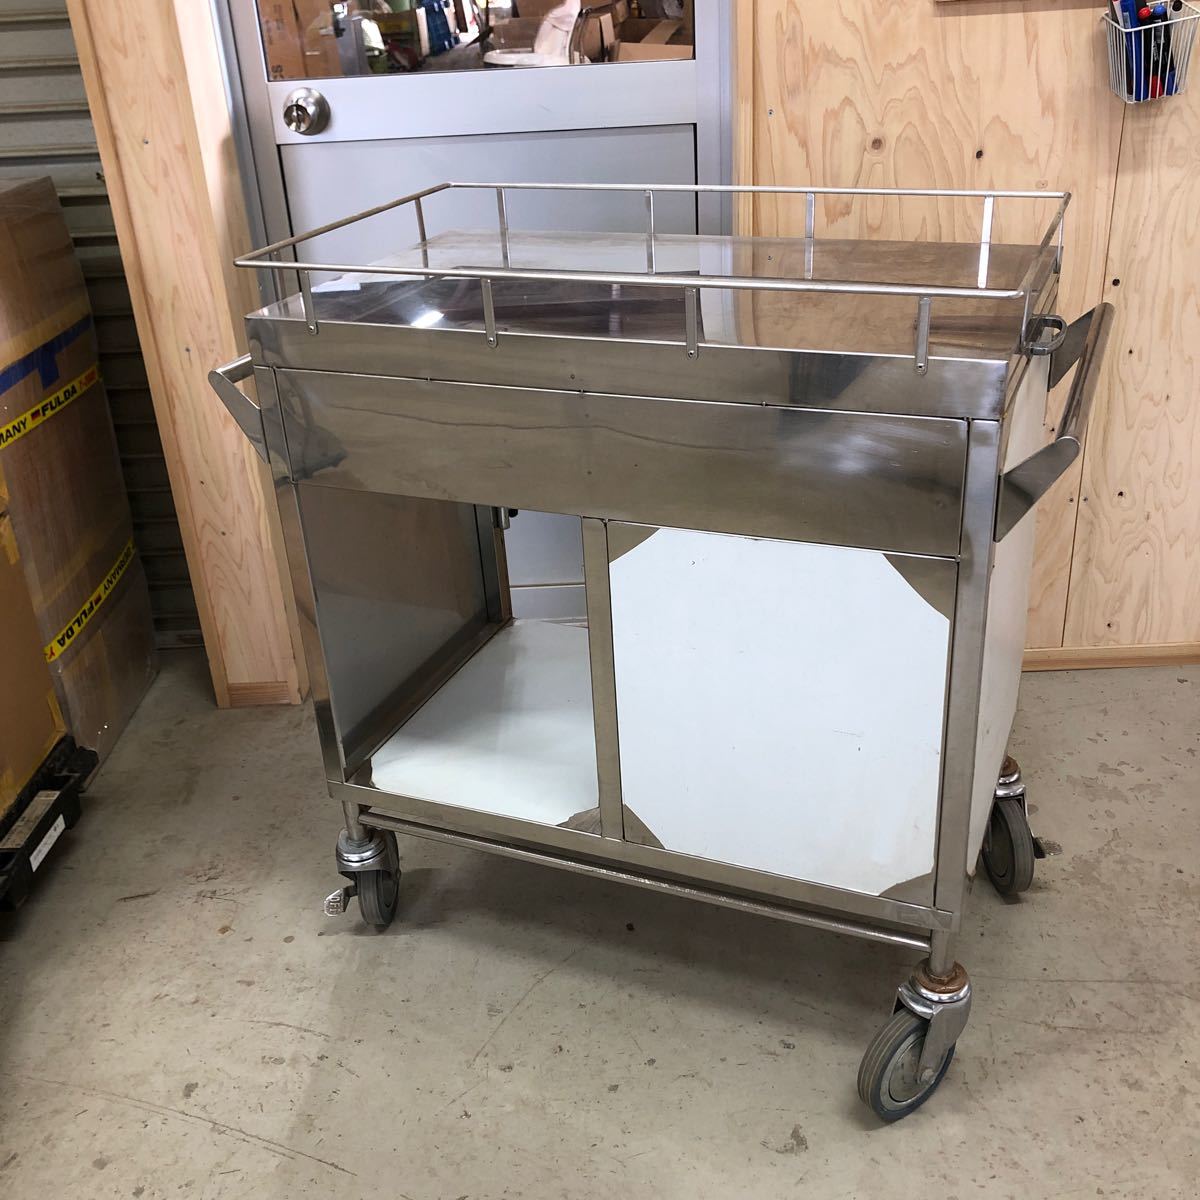 861 original stainless steel with casters Wagon rack / times ... hospital medical care kitchen store furniture movement work industry garage 